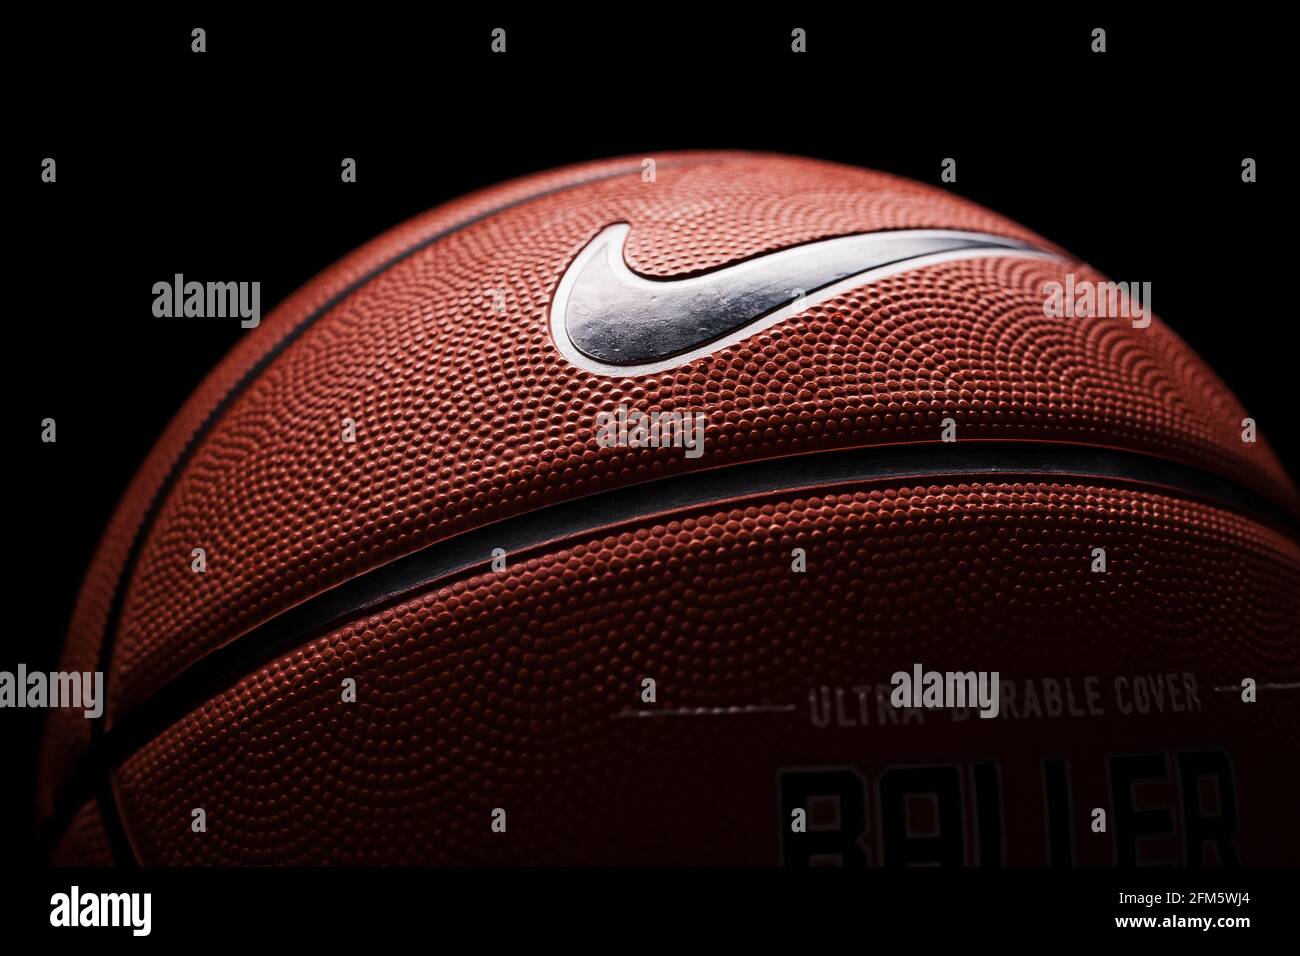 Nike brand, basketball ball Nike Baller. Orange rubber outdoor ball, ultra-durable  cover, close-up on a black background Stock Photo - Alamy